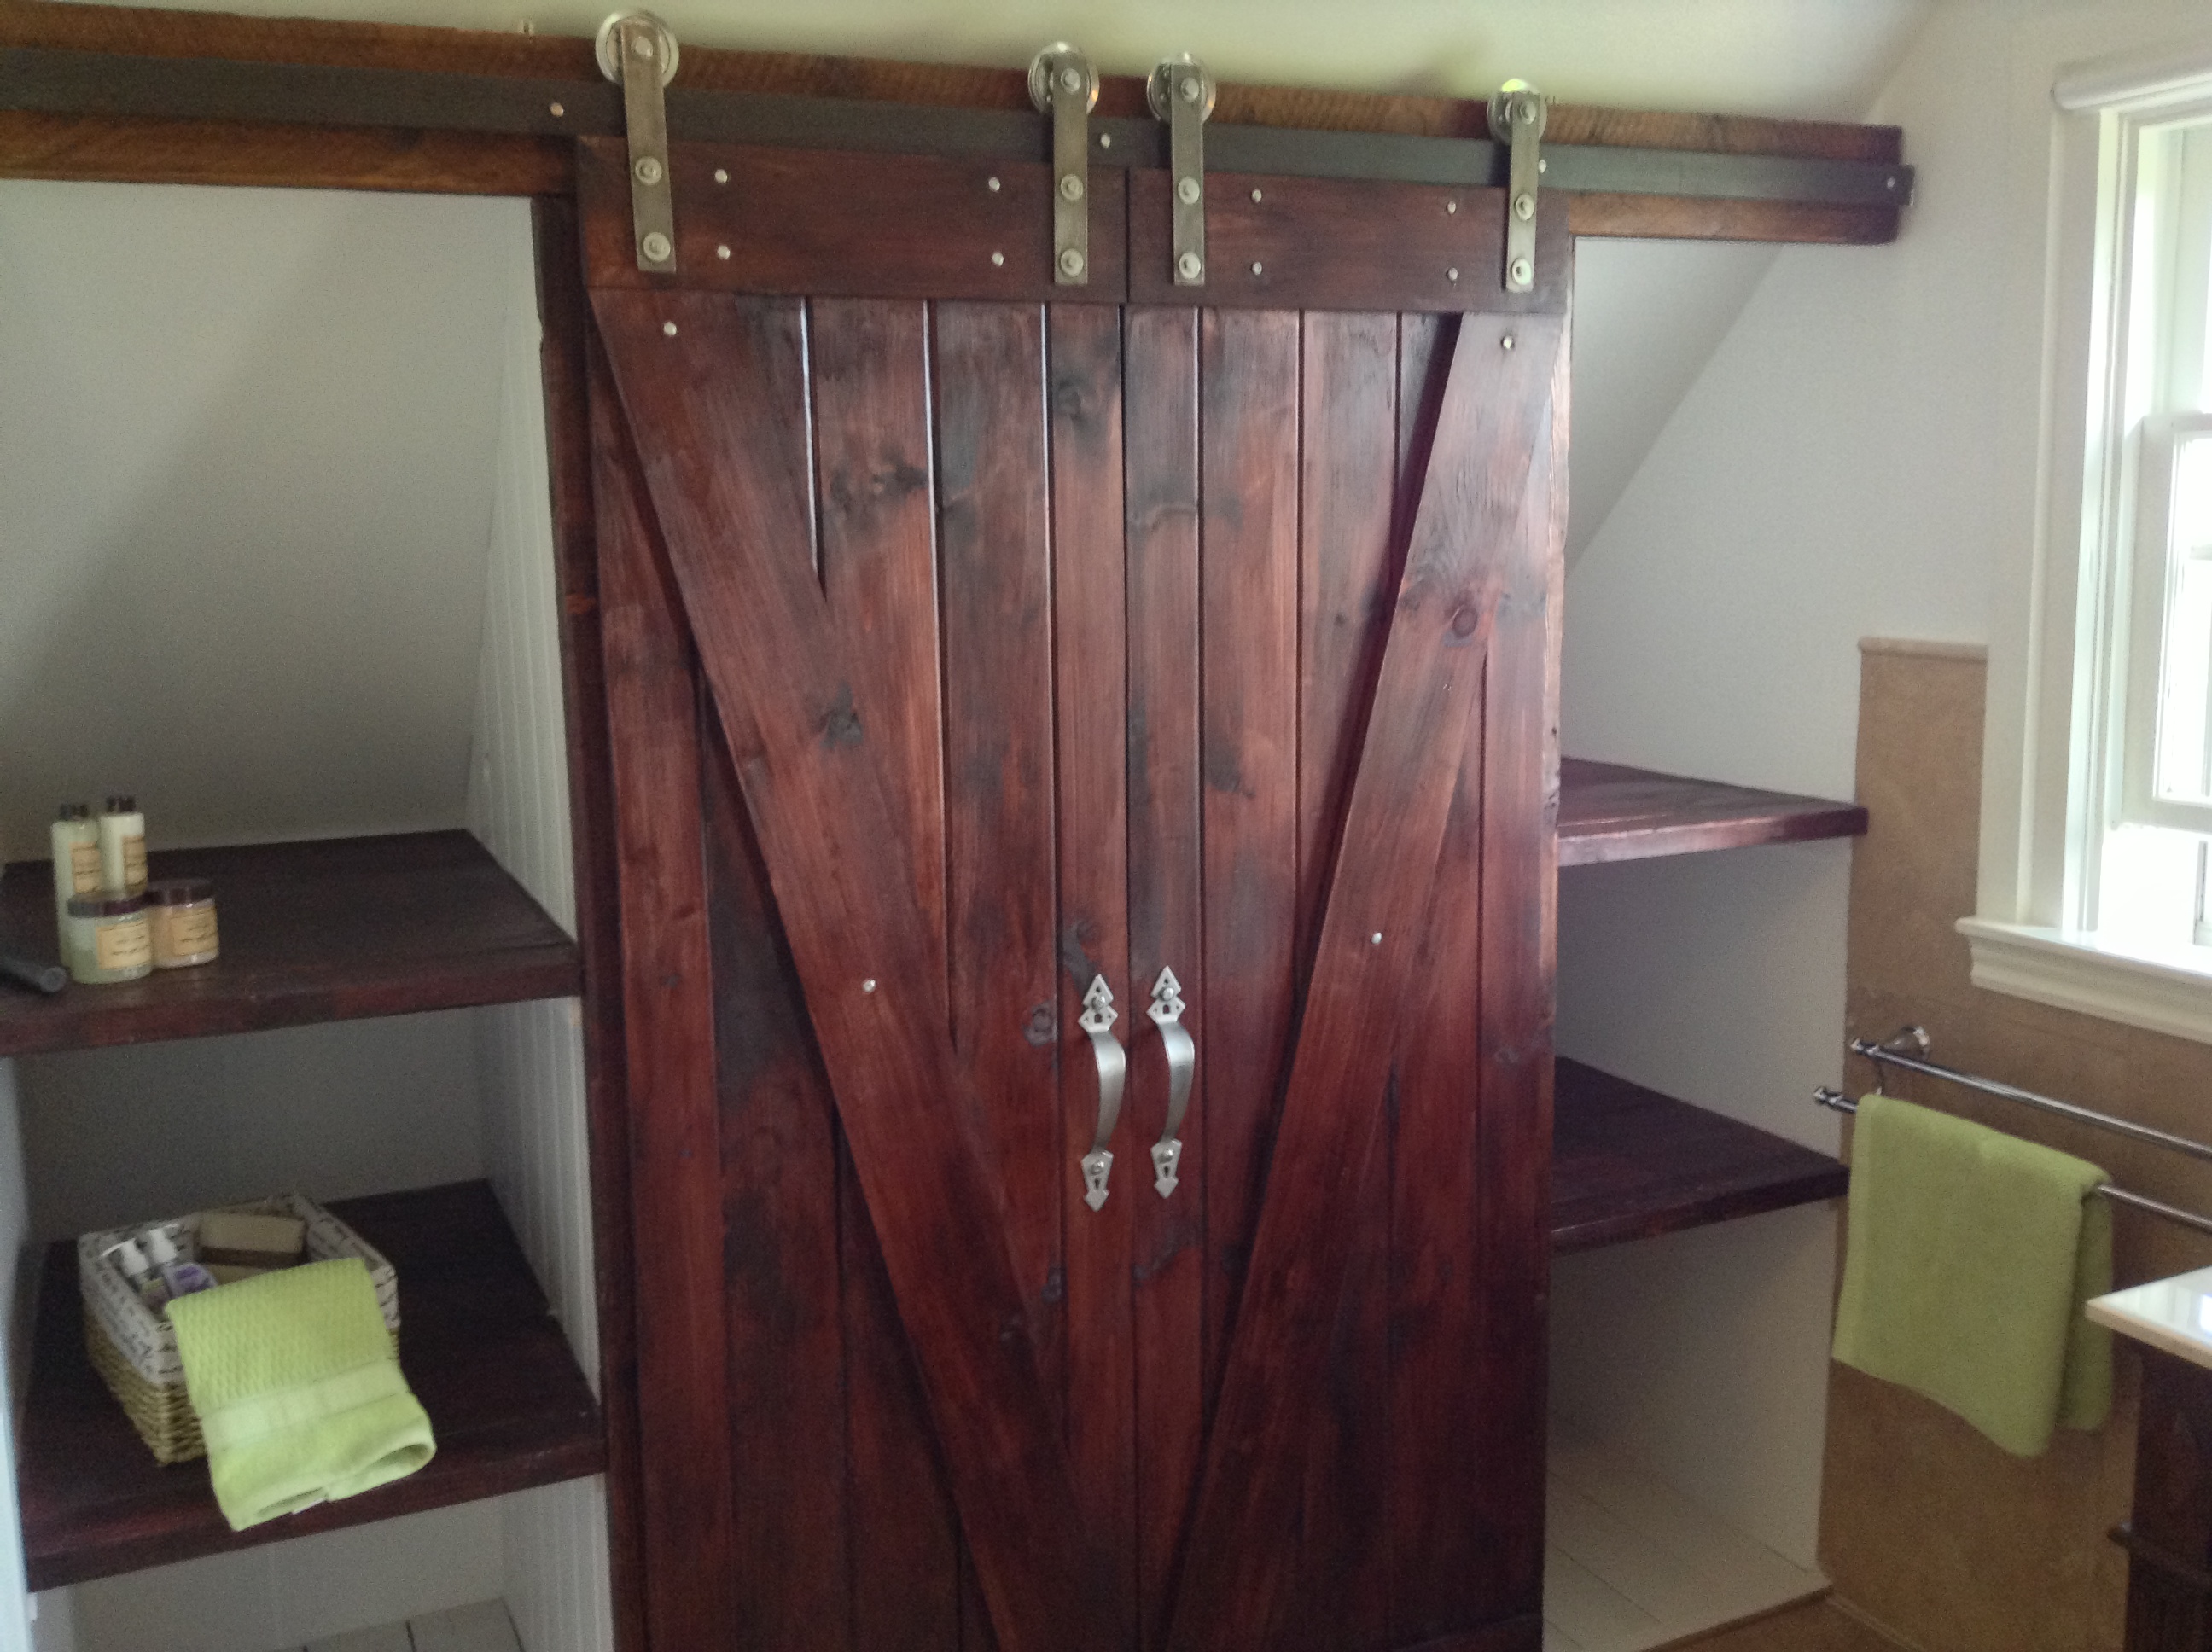 Teak Wood Bar Door With Chrome Metal Handle In Cherry Finished ...